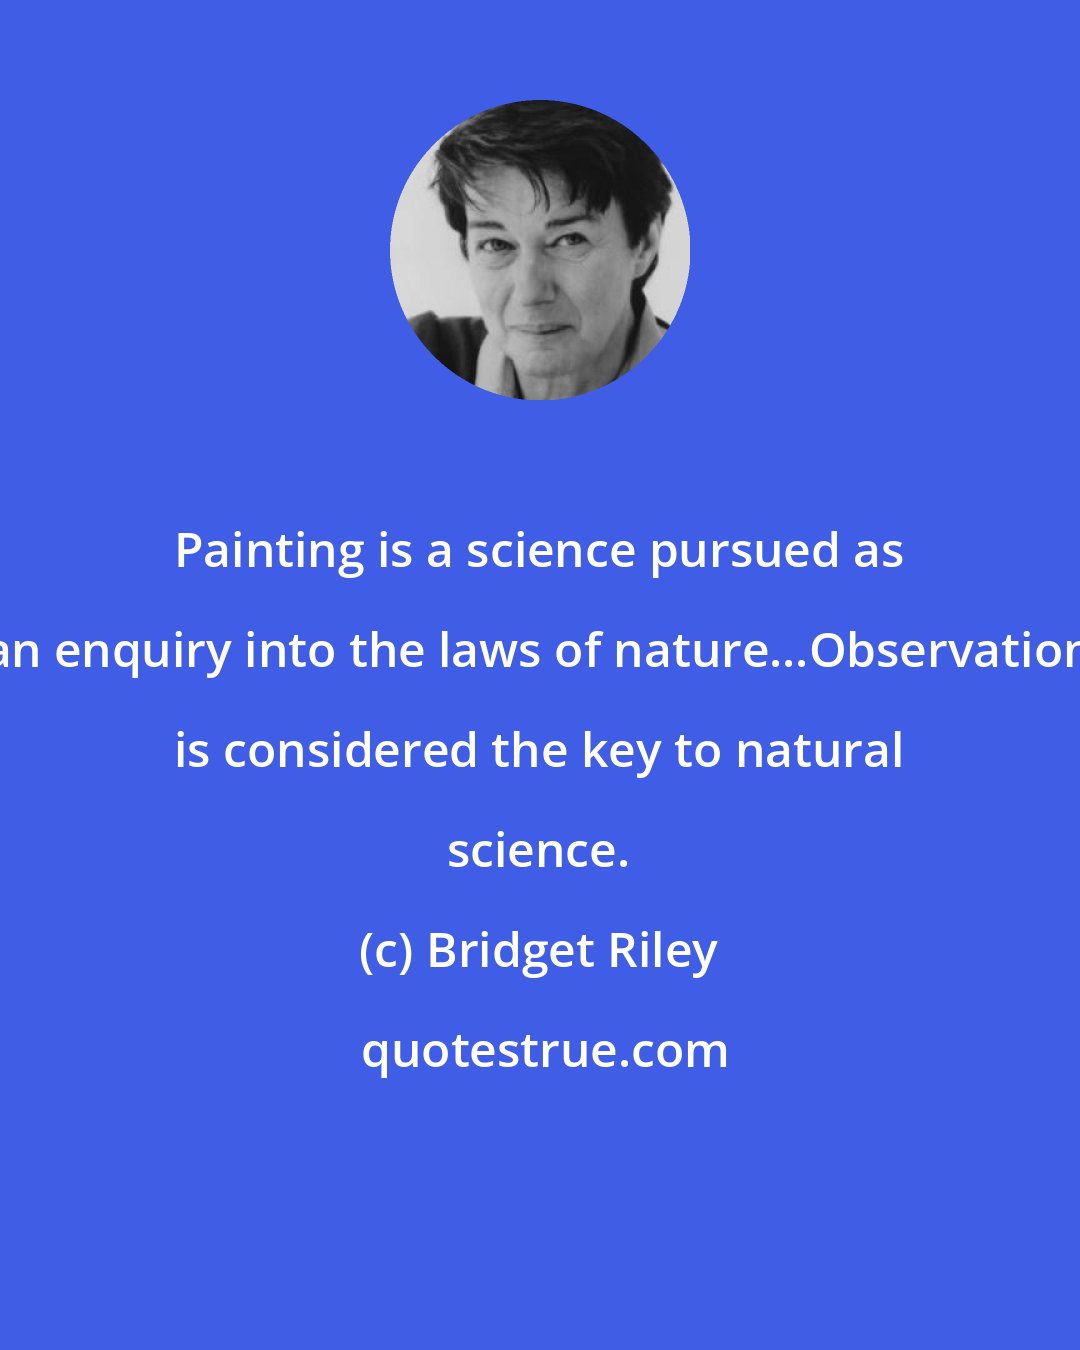 Bridget Riley: Painting is a science pursued as an enquiry into the laws of nature...Observation is considered the key to natural science.